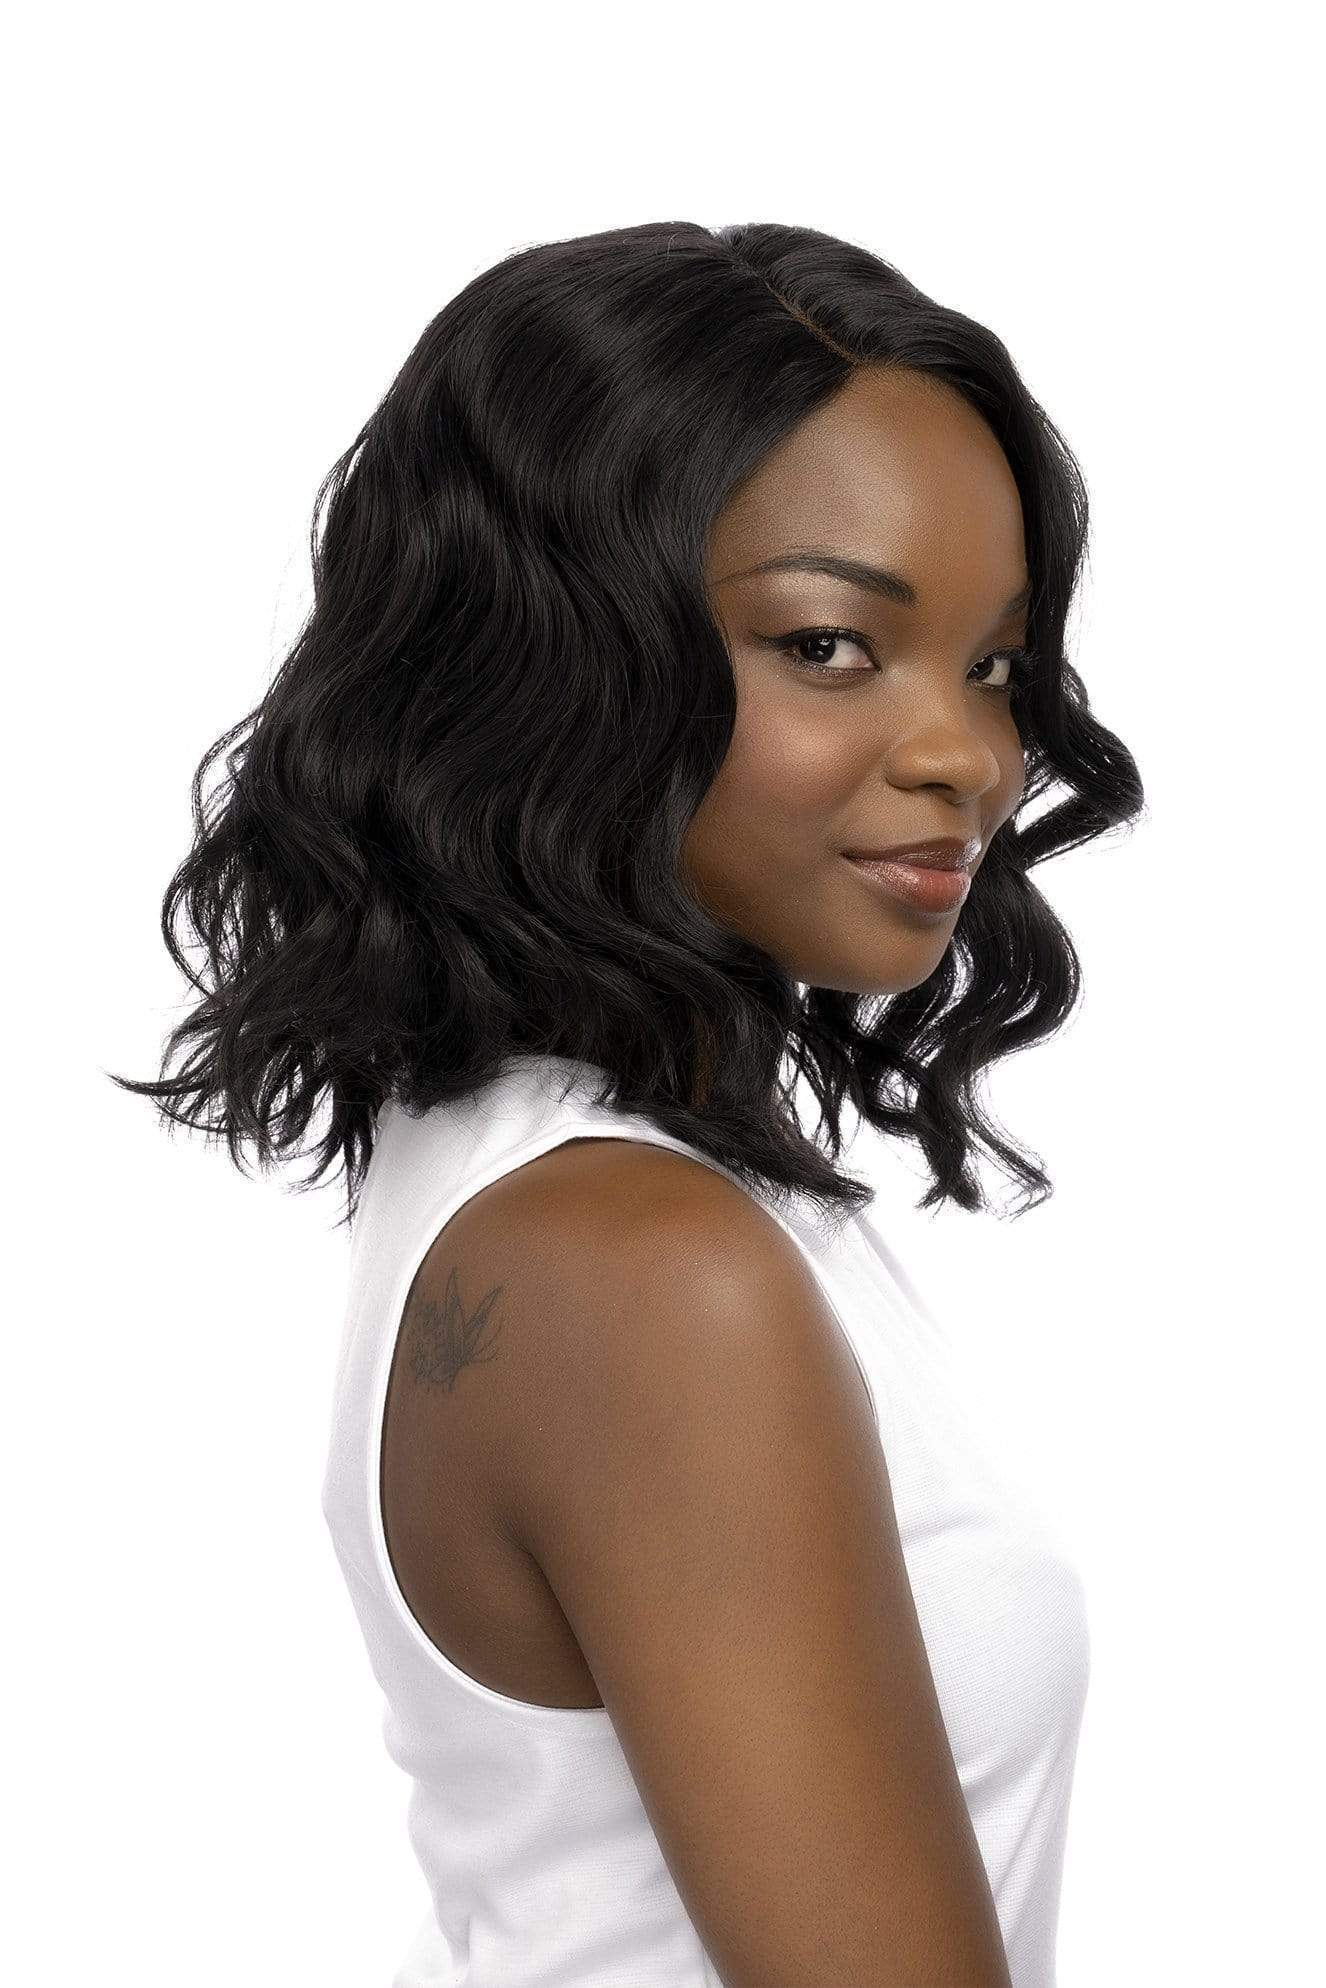 Cocktails in Copacabana Wig 7-11.5" Short Wavy Bob 11inch Lace Front T-part Synthetic Hair Natural Black